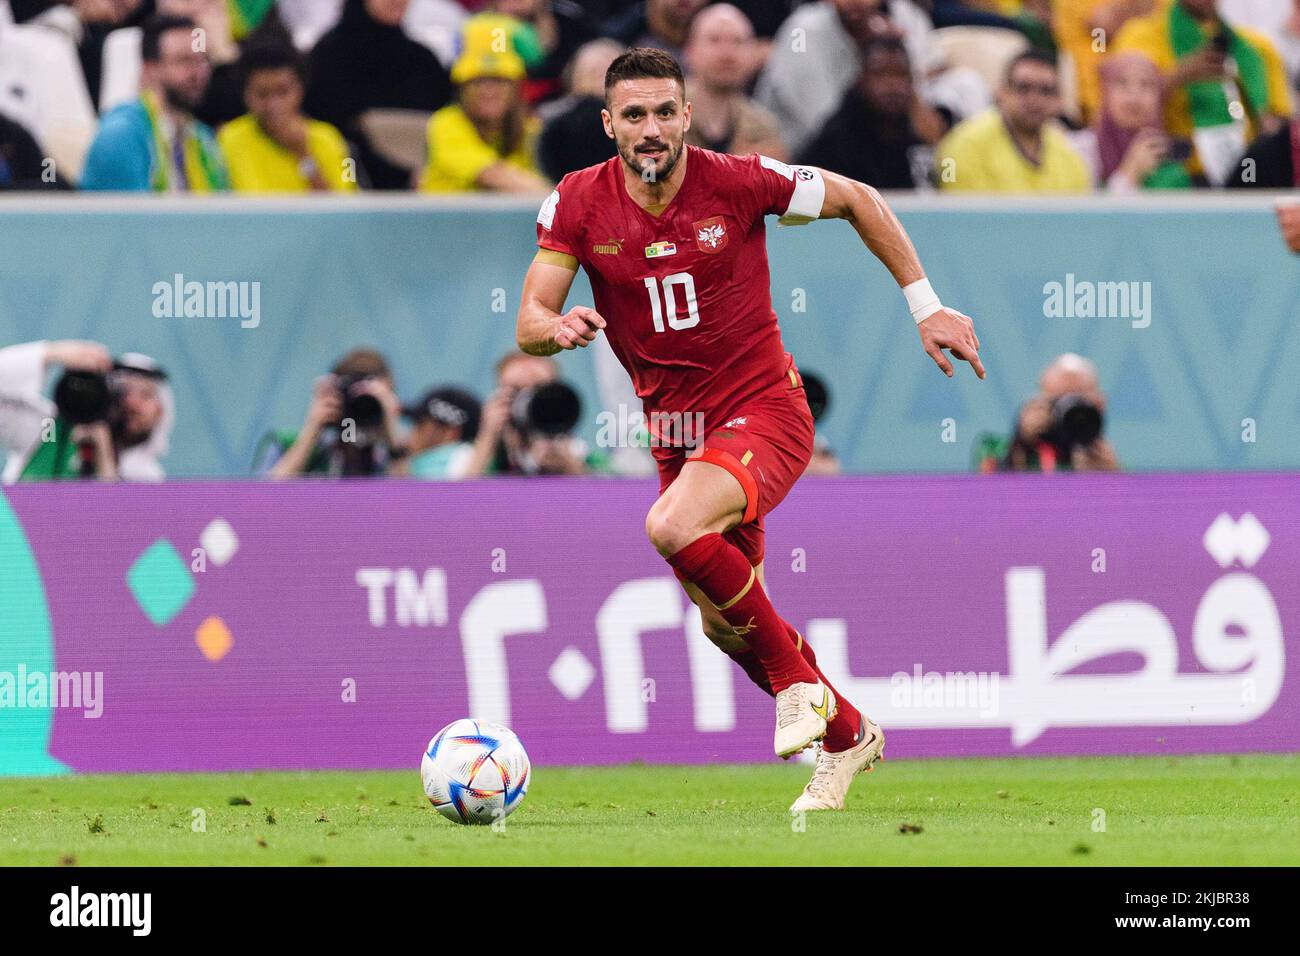 Lusail, Qatar. 24th Nov, 2022. Lusail, Qatar, Nov 25th 2022: Dusan Tadic of Serbia during a match between Brazil vs Serbia, valid for the group stage of the World Cup, held at the Lusail National Stadium in Lusail, Qatar. (Marcio Machado/SPP) Credit: SPP Sport Press Photo. /Alamy Live News Stock Photo